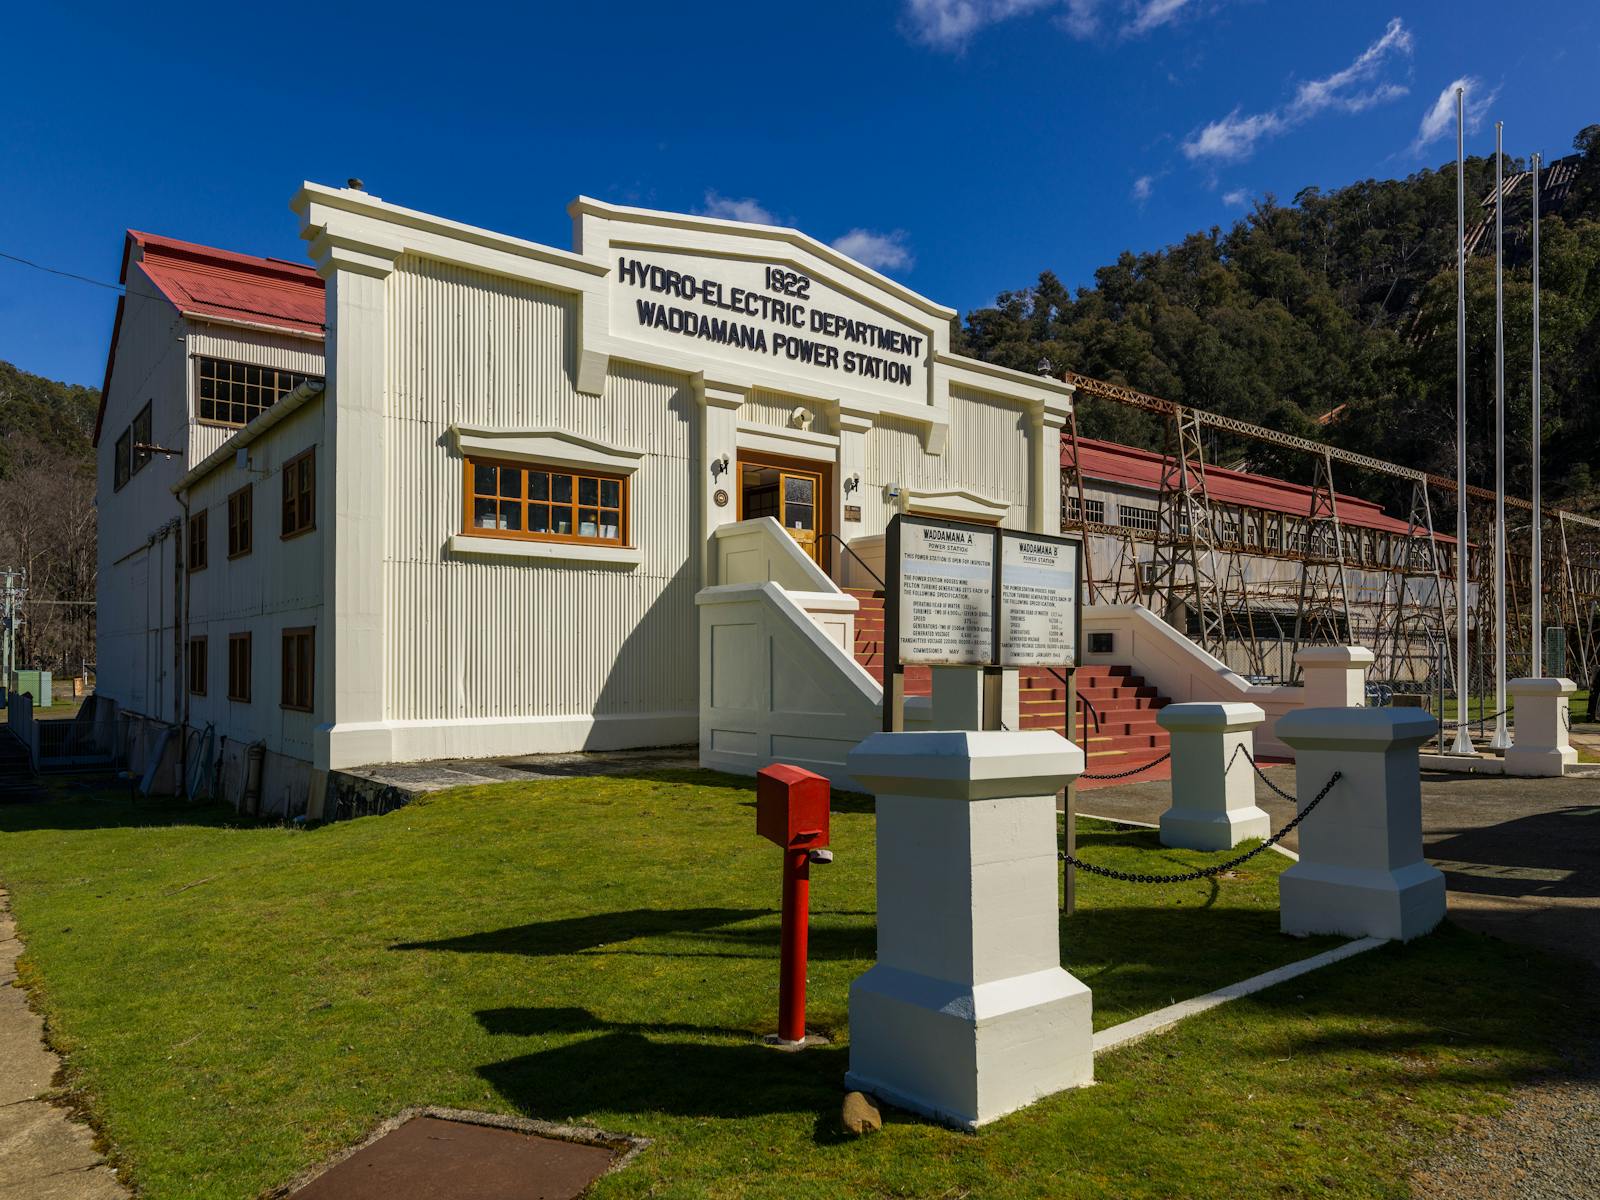 Photo of front entrance to Waddamana Power Station